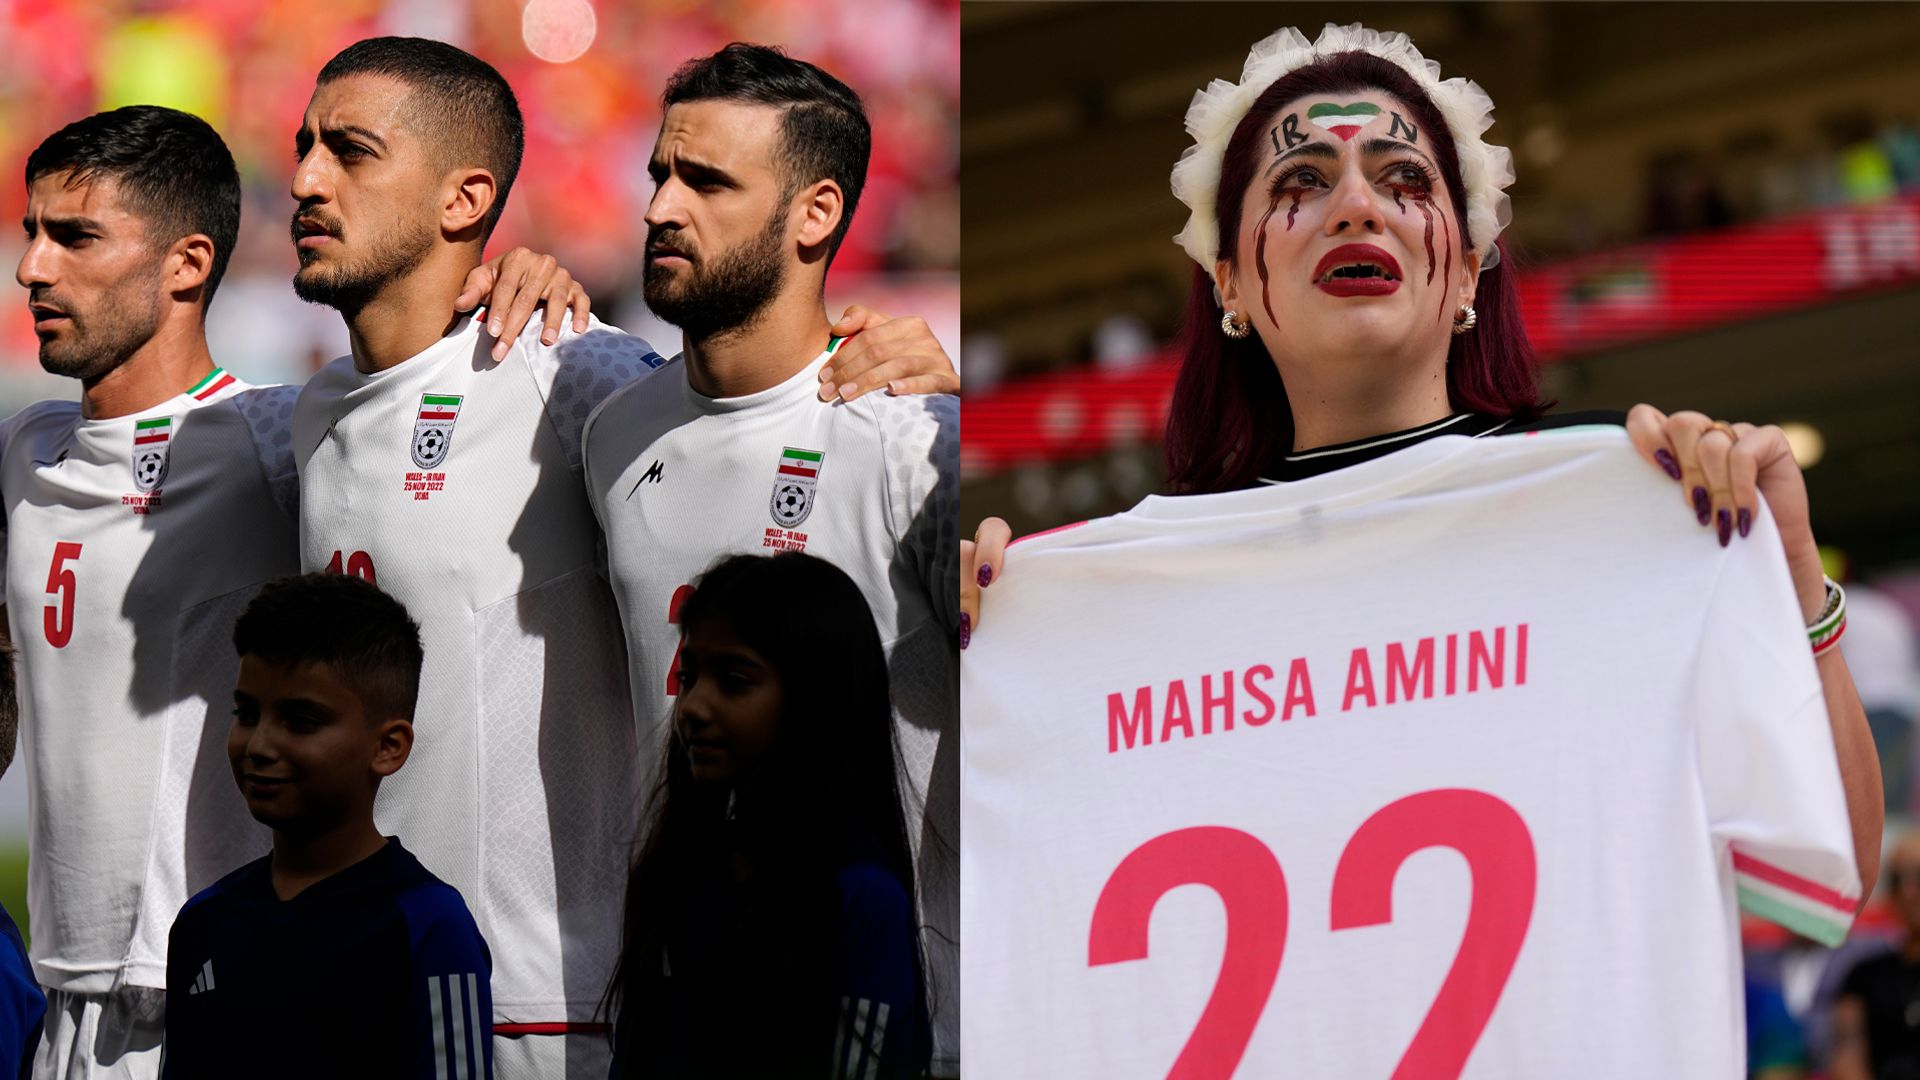 Iran players sing anthem | Mahsa Amini tributes | Fans unrest reported